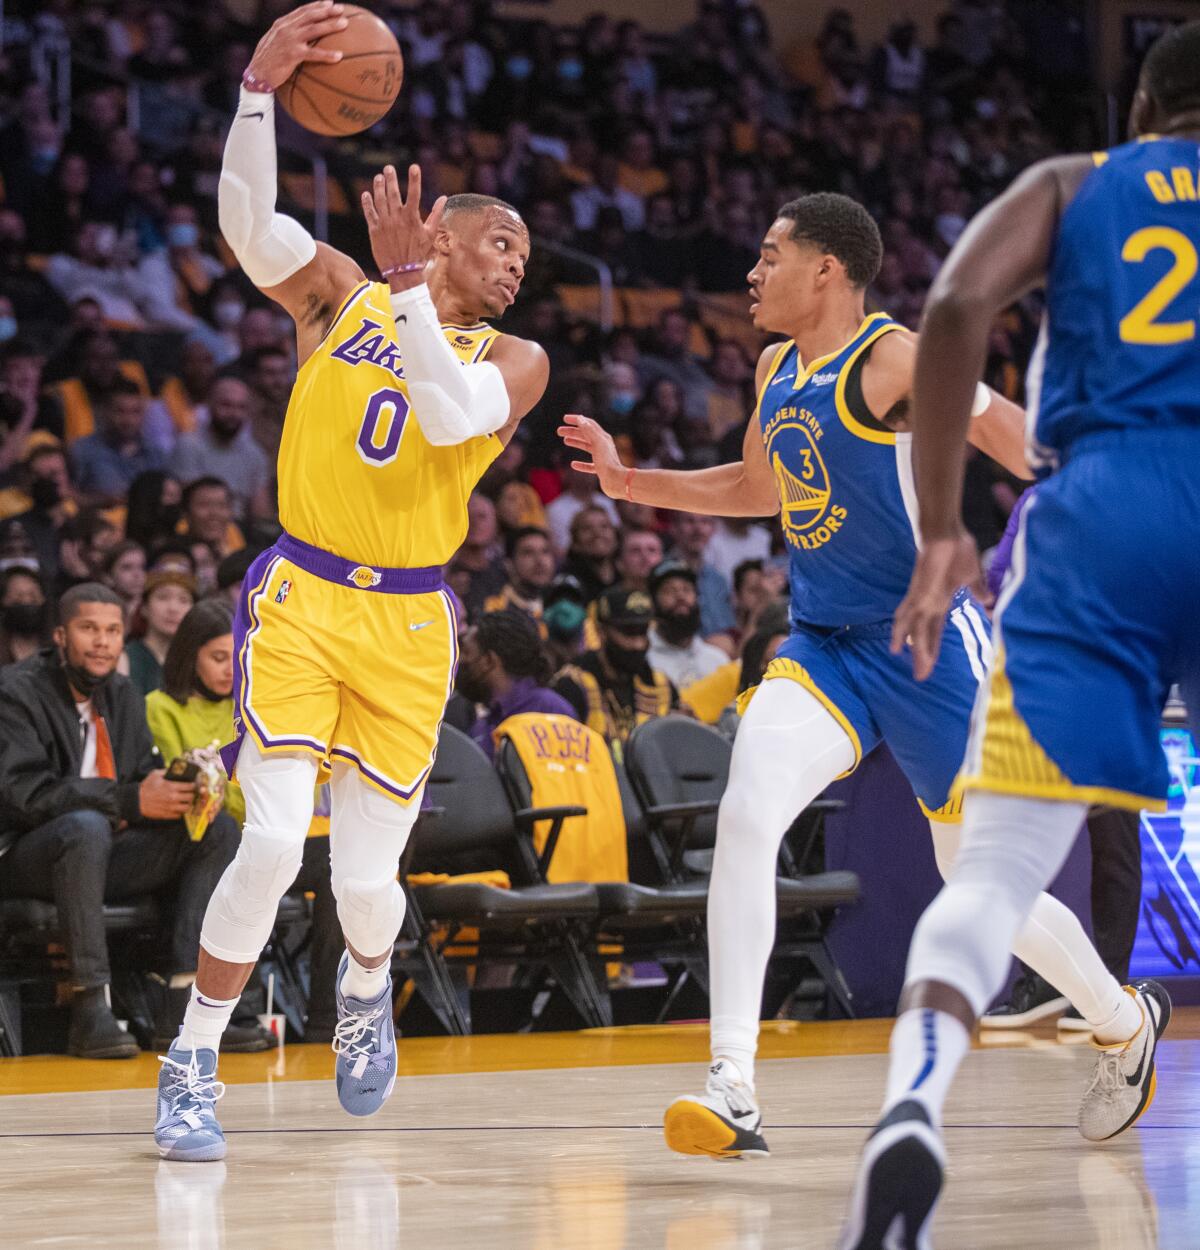 Lakers guard Russell Westbrook passes the ball over Warriors guard Jordan Poole.